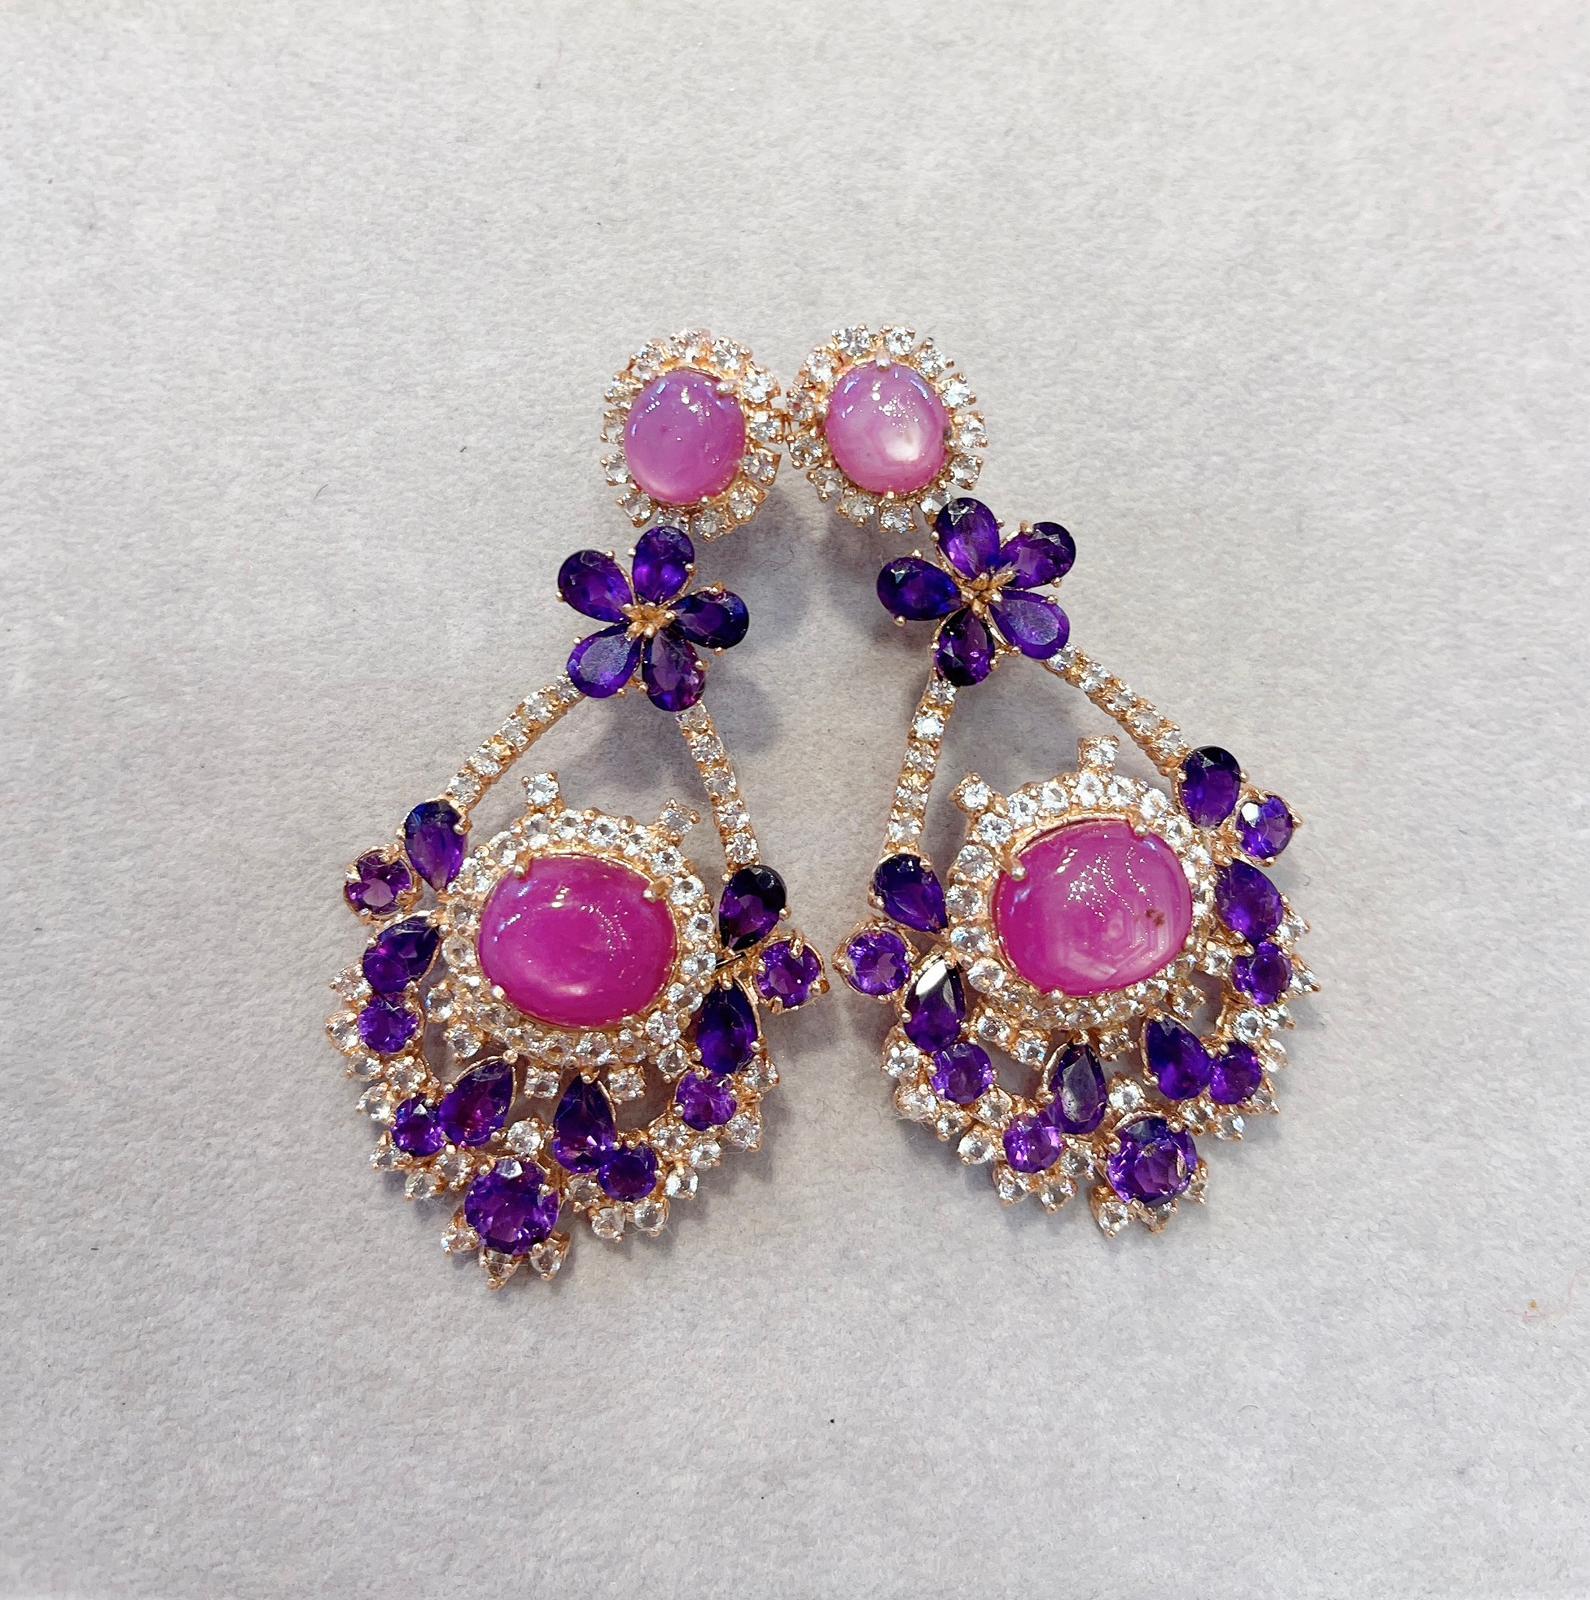 Bochic Earrings
Drop style 
Natural Pink Star Ruby Cabochons
18 Carats 
Shape - Cabochon
Natural Purple Amethysts
17 Carats 
Shape - Pear shapes 
White Natural Round Brilliant Topaz 
4 Carats 
Set 22k gold and Silver 
Vintage style “Capri” Earrings.